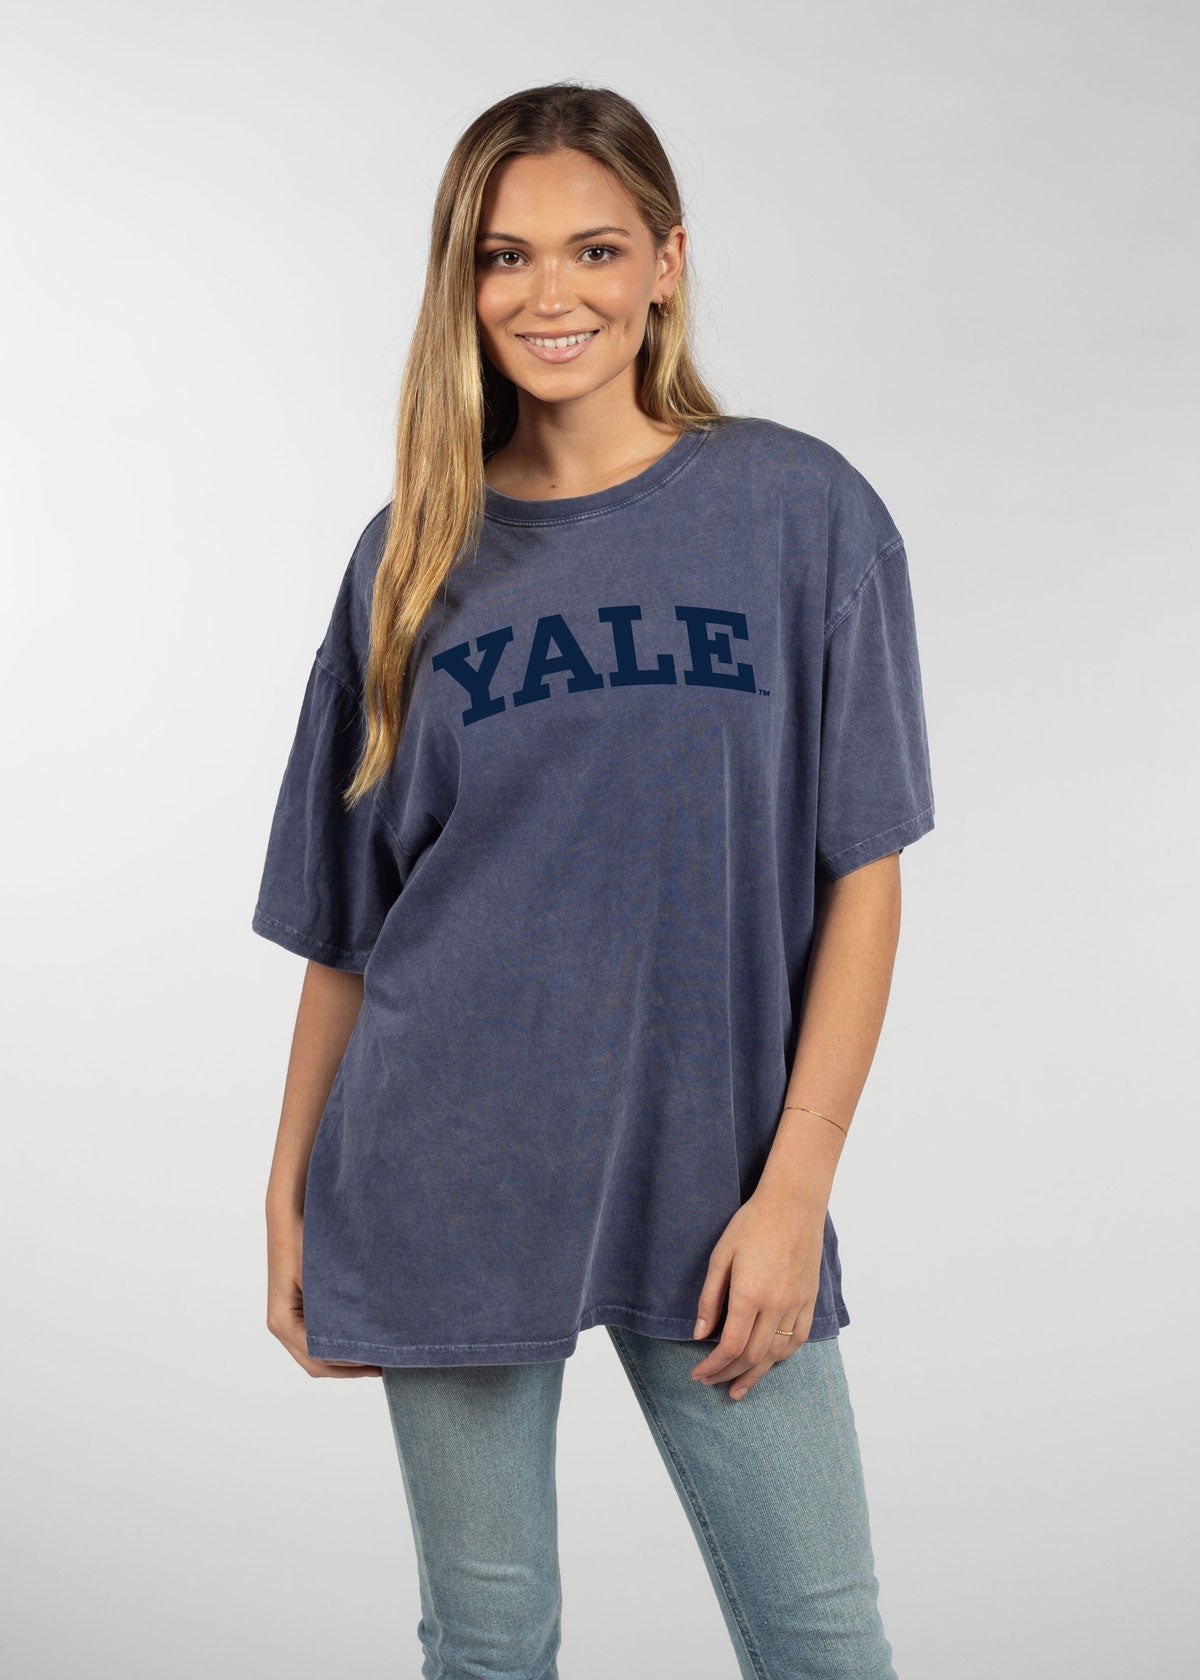 Pre-order: Yale The Band Tee